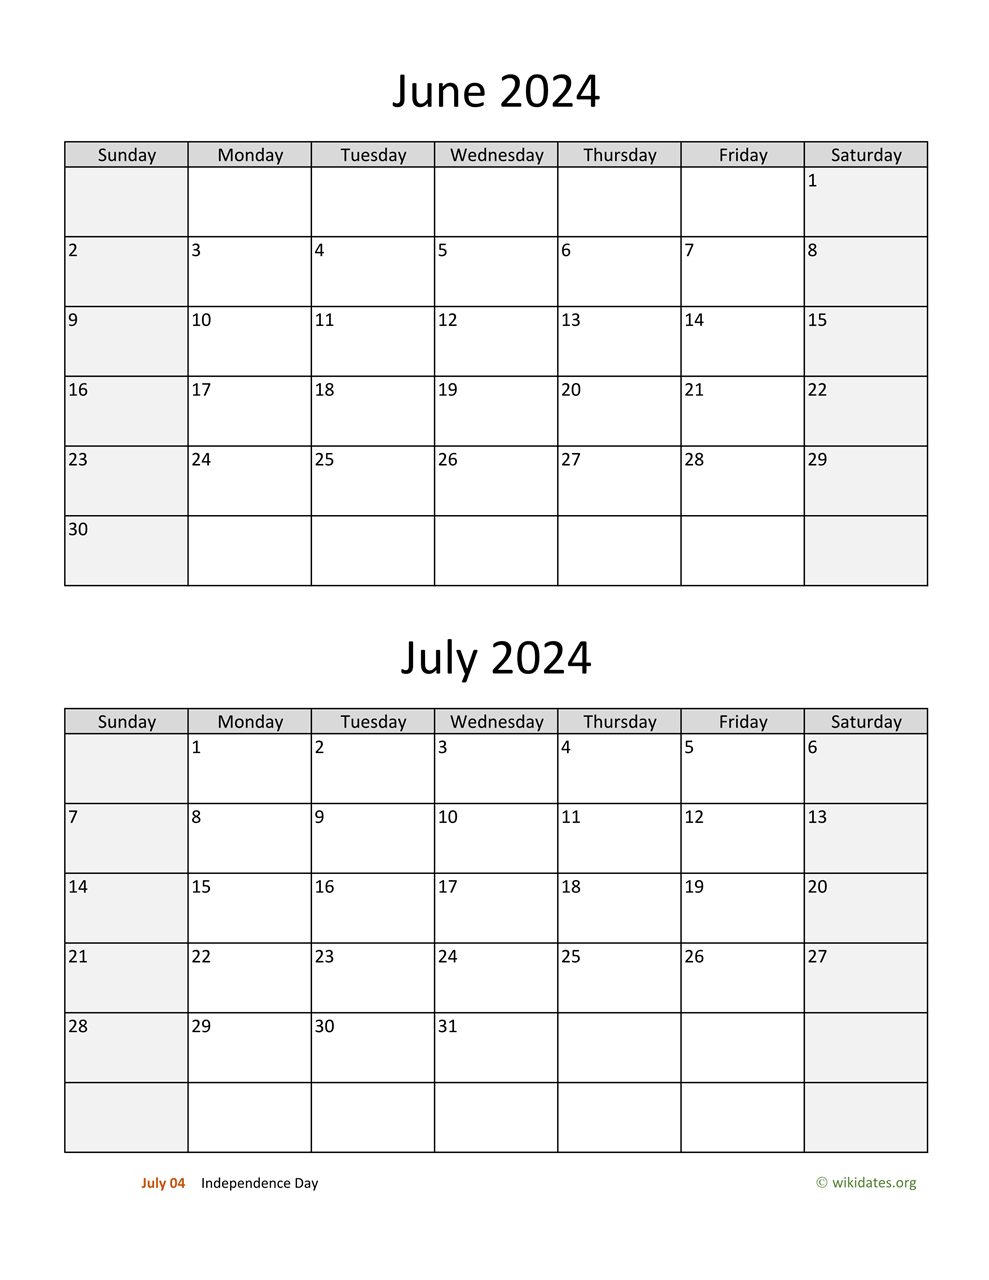 June And July 2024 Calendar | Wikidates for June And July 2024 Printable Calendar